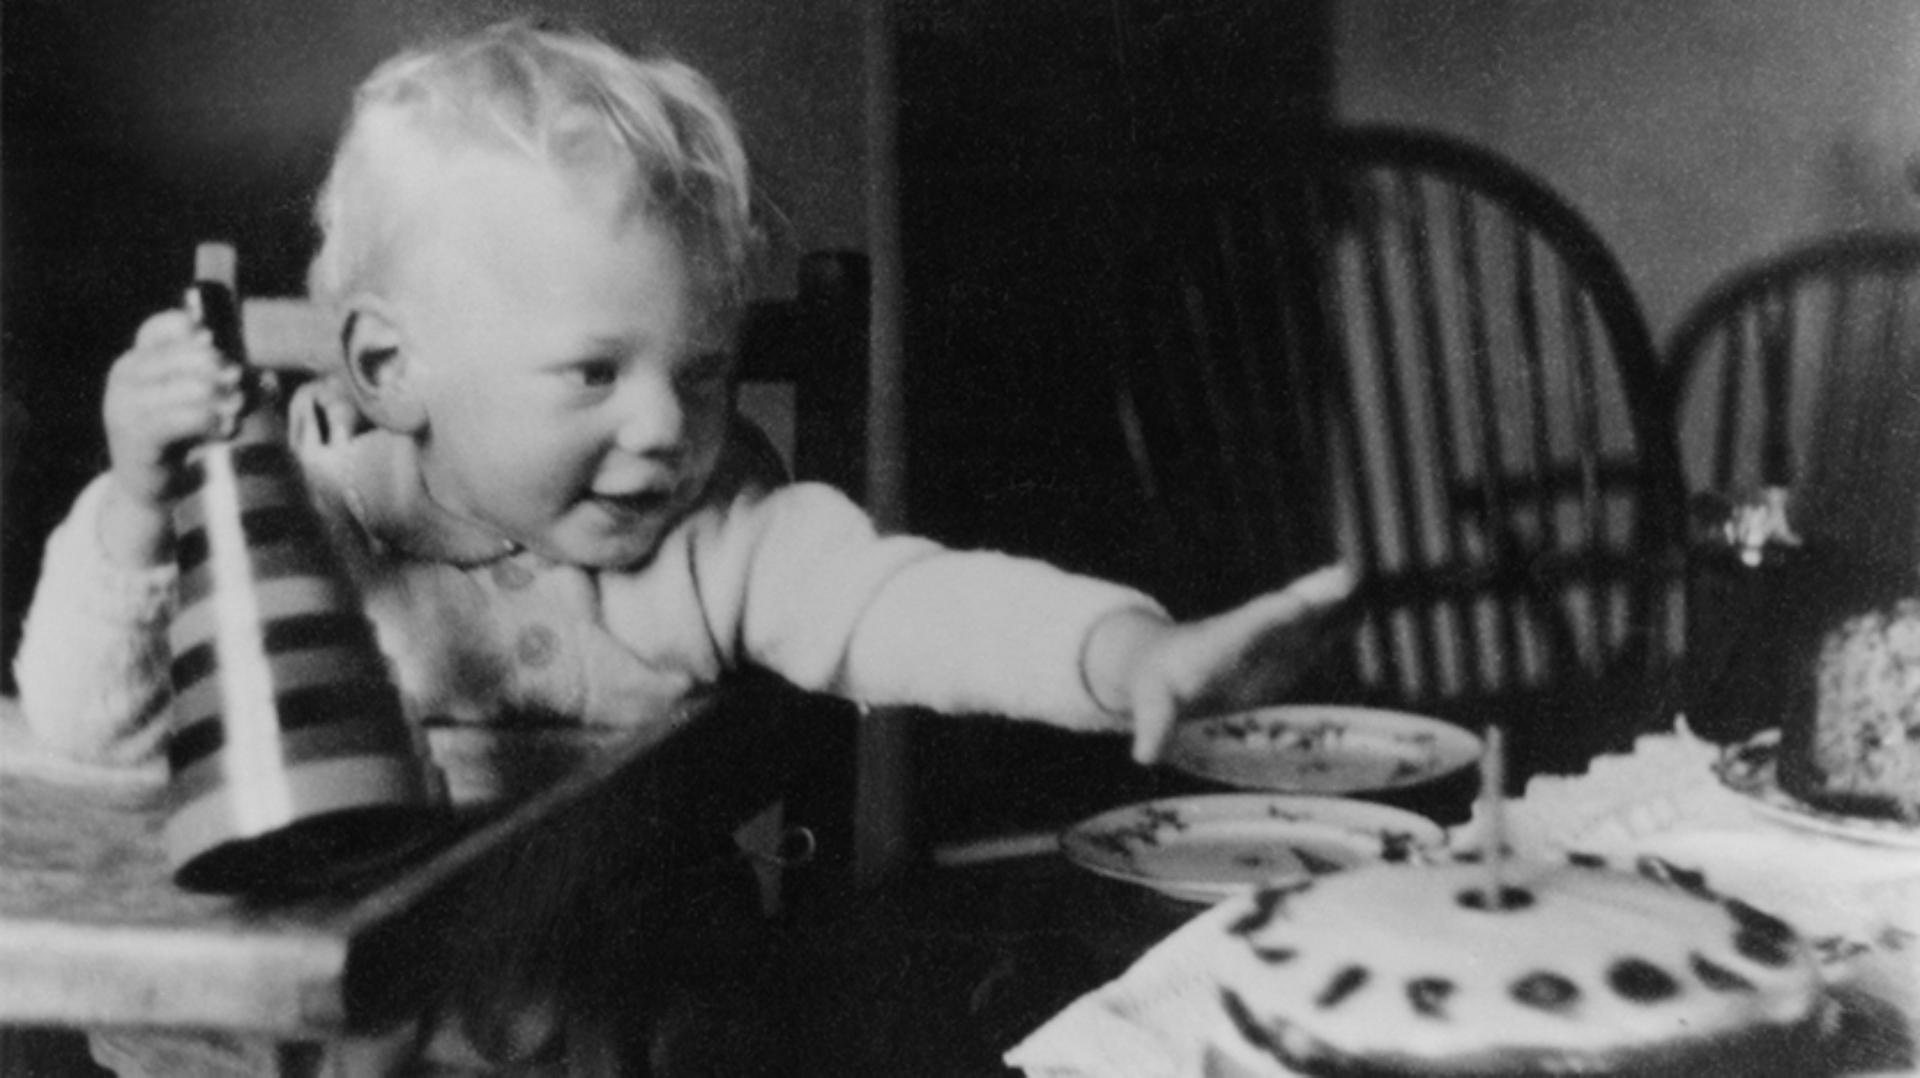 James Dyson on his first birthday reaching for his birthday cake